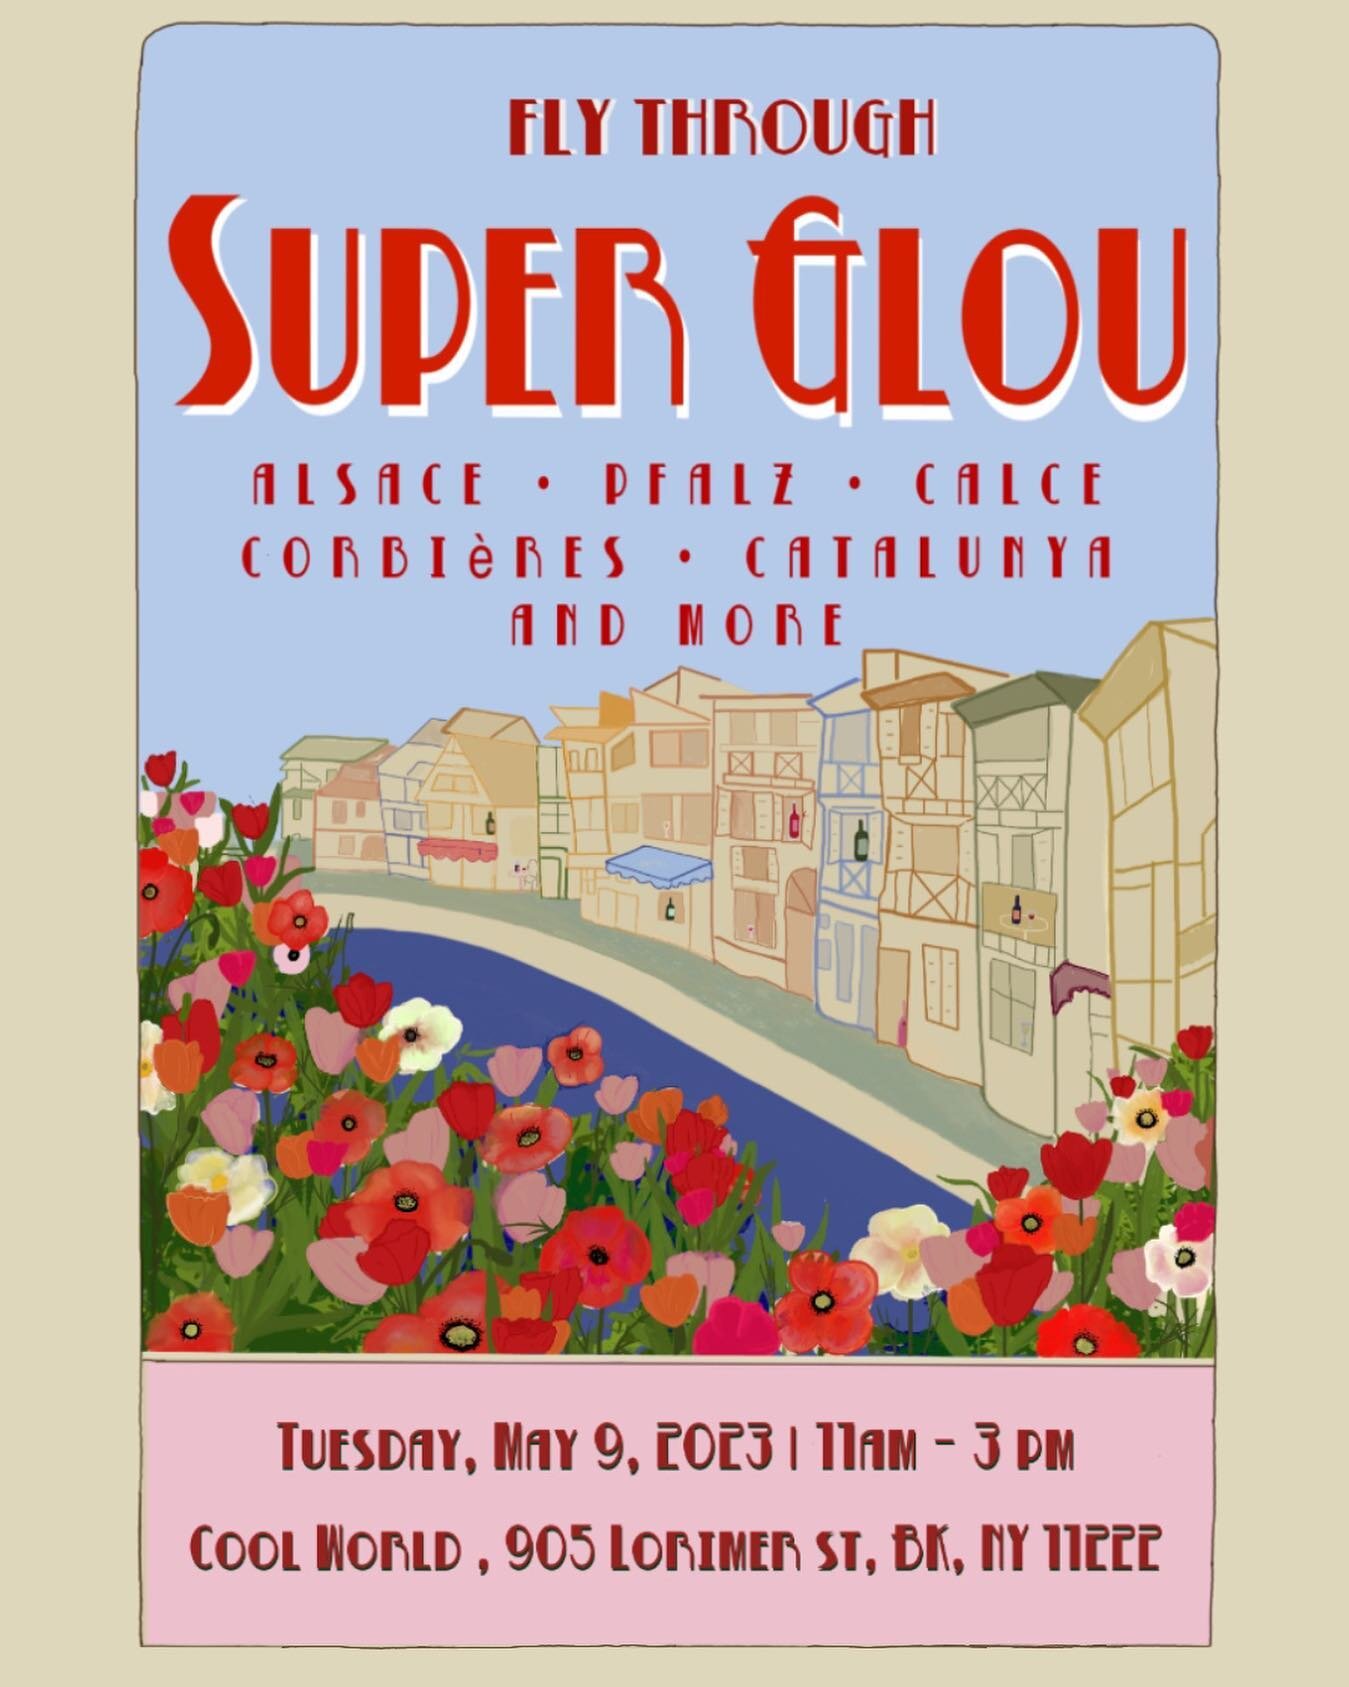 I made this flyer for @super_glou &lsquo;s upcoming trade tasting at @cool.worldnyc 🍷🌷🥂 inspired by vintage travel post cards 

#wine #travel #postcard #vintage #art #graphicdesign #french #glouglou hmmm what else #illustration #tulips #flyer #hir